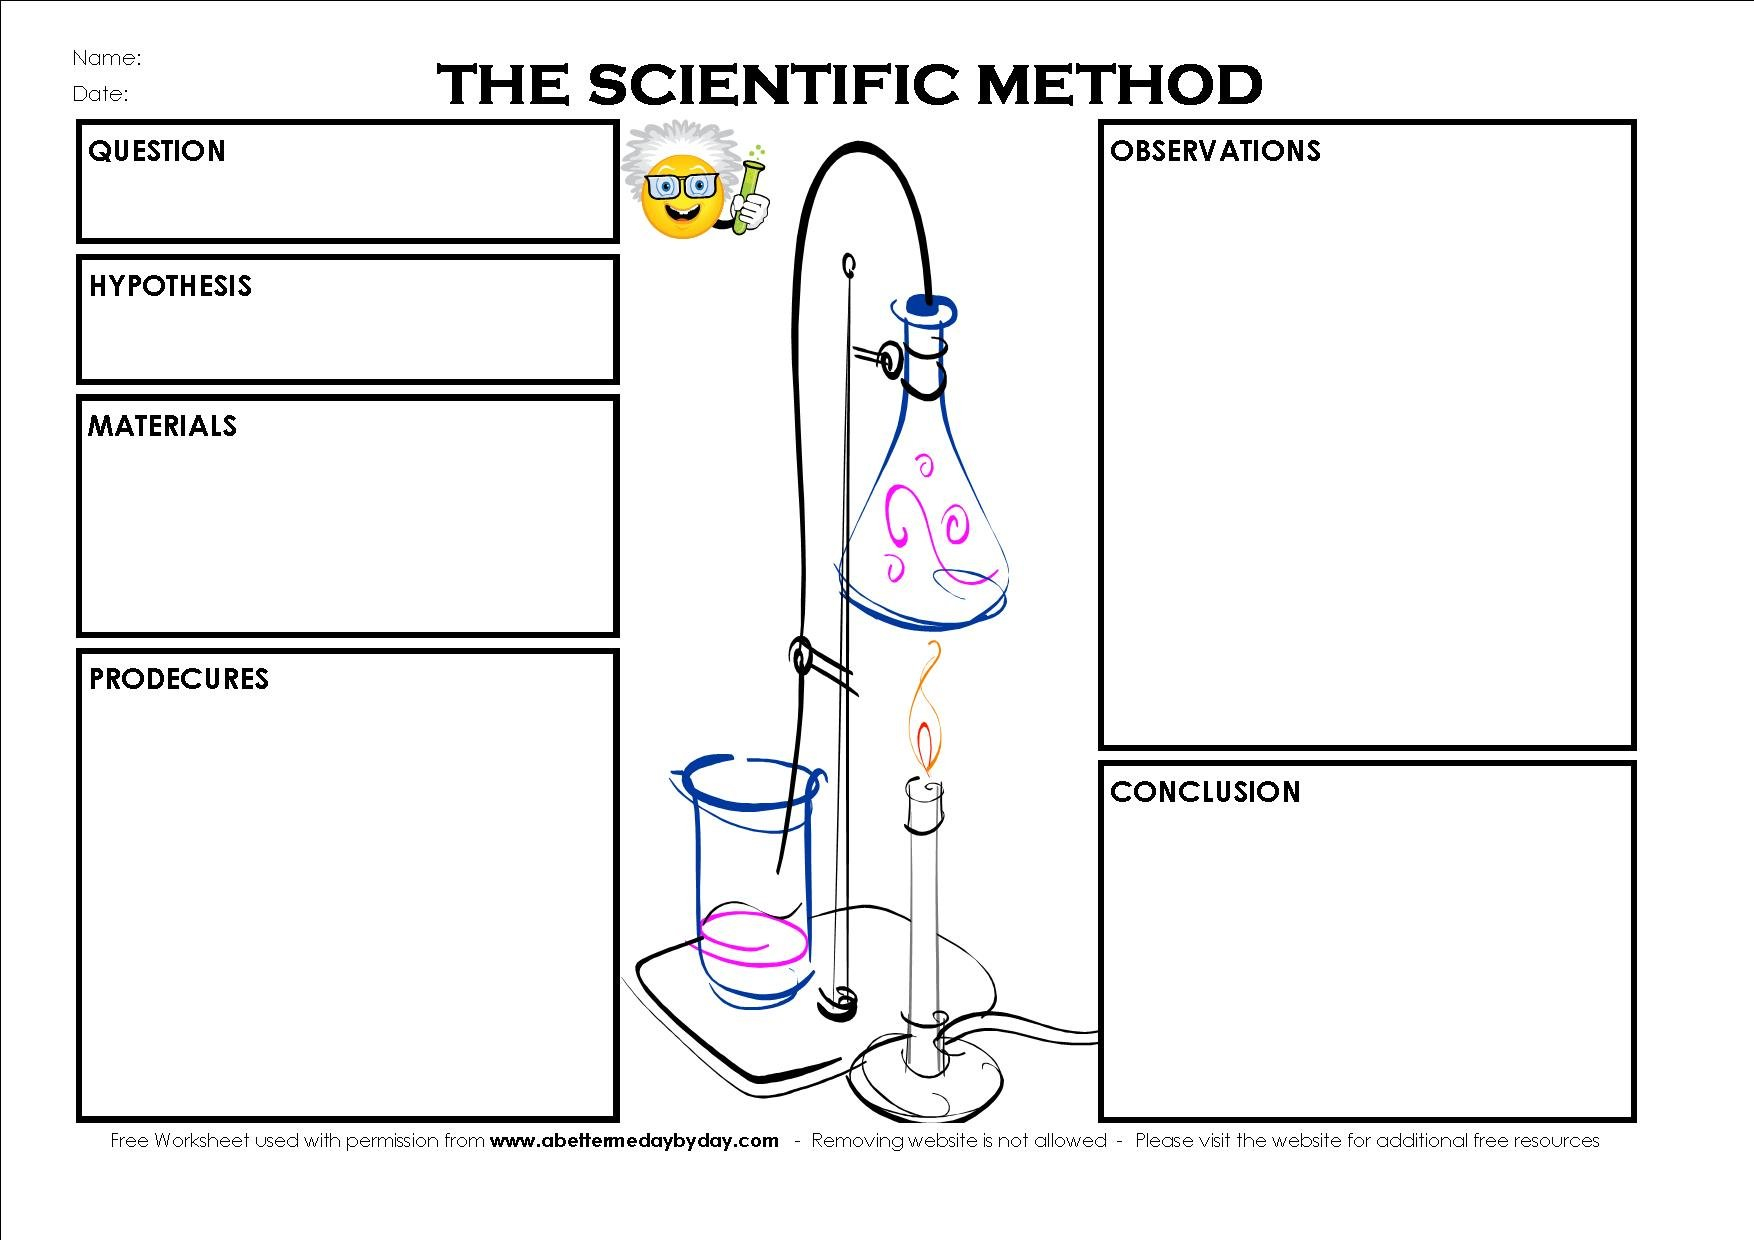 Free Worksheet Elementary Level Scientific Method  A Better Me Day Intended For Introduction To The Scientific Method Worksheet